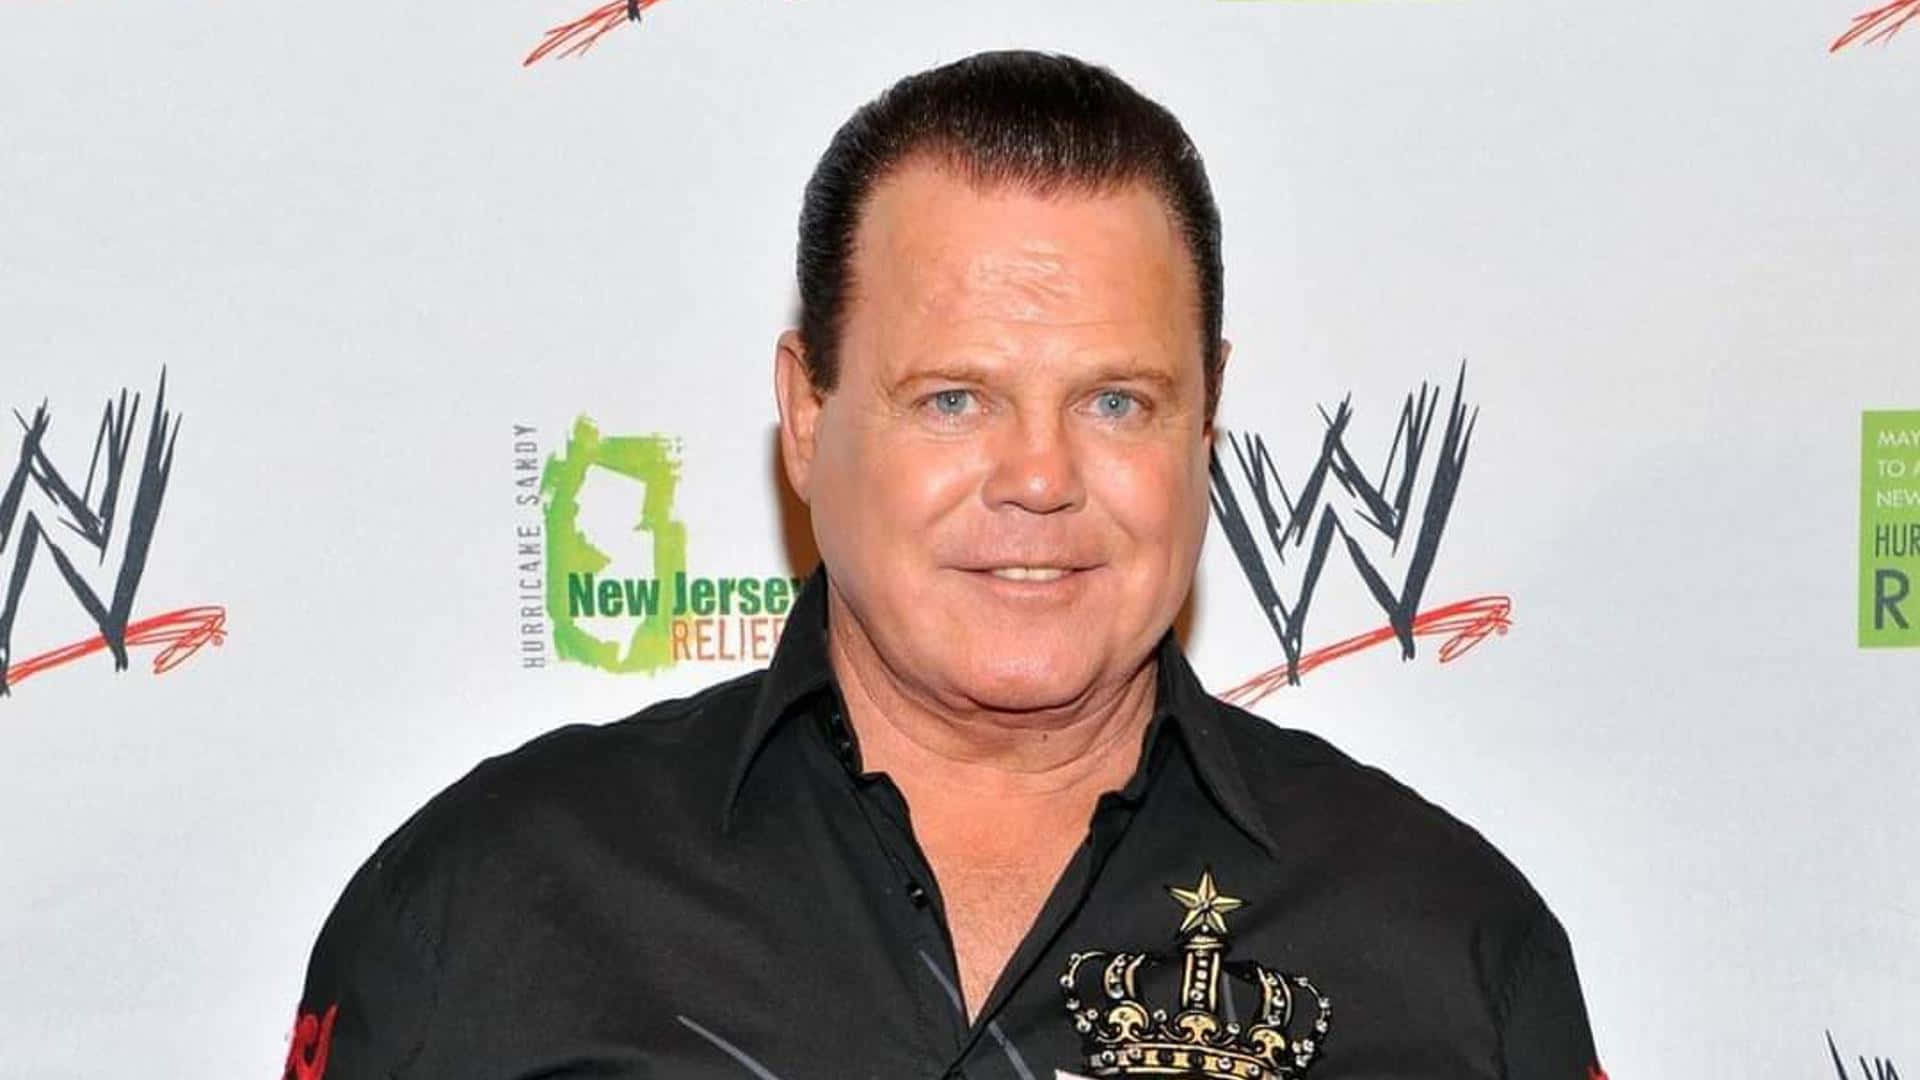 Jerry Lawler ved Sandy Relief Event 2013 Wallpaper